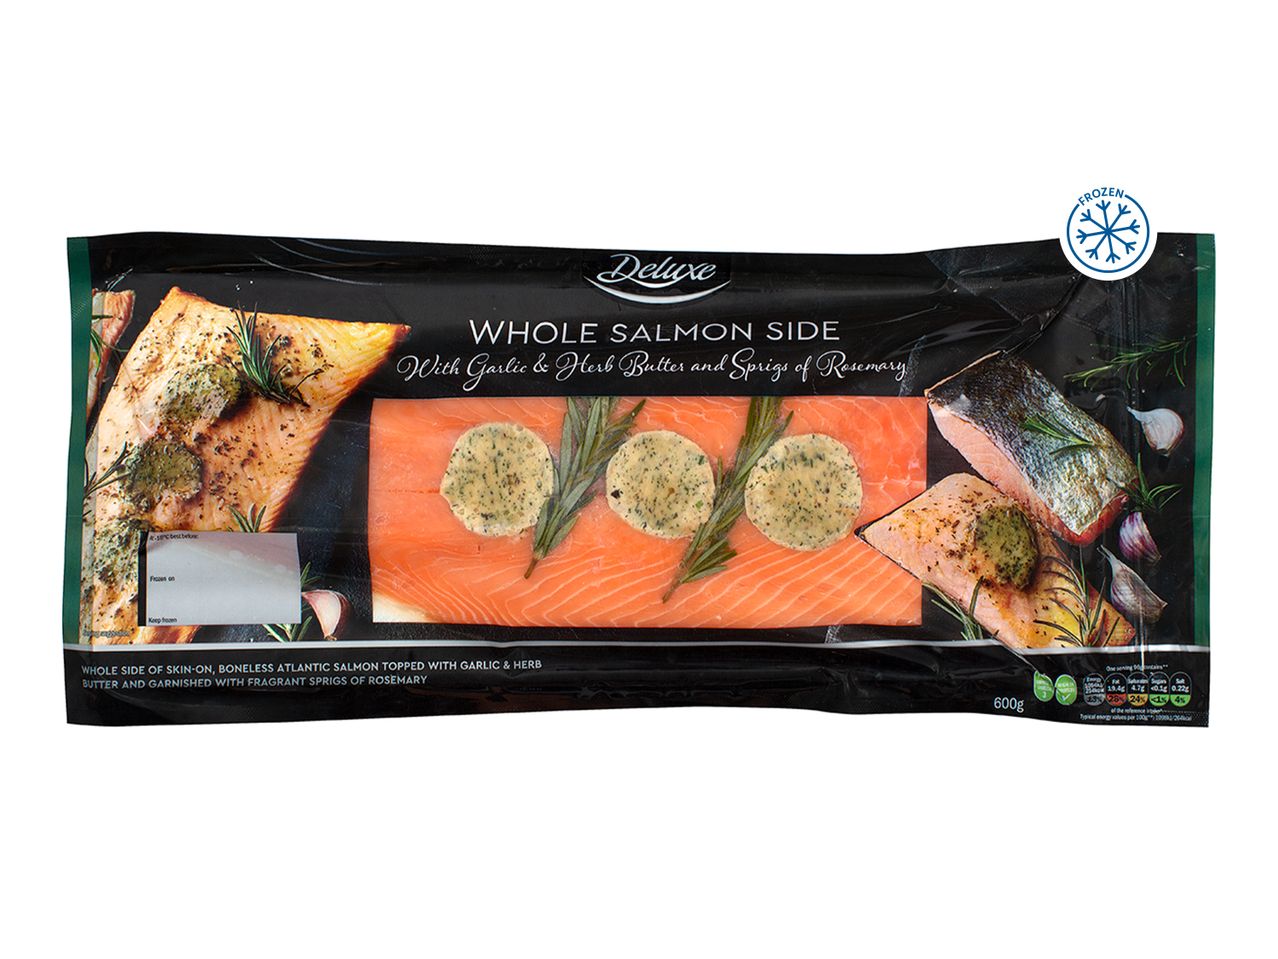 Go to full screen view: Deluxe Scottish Salmon Side - Image 1